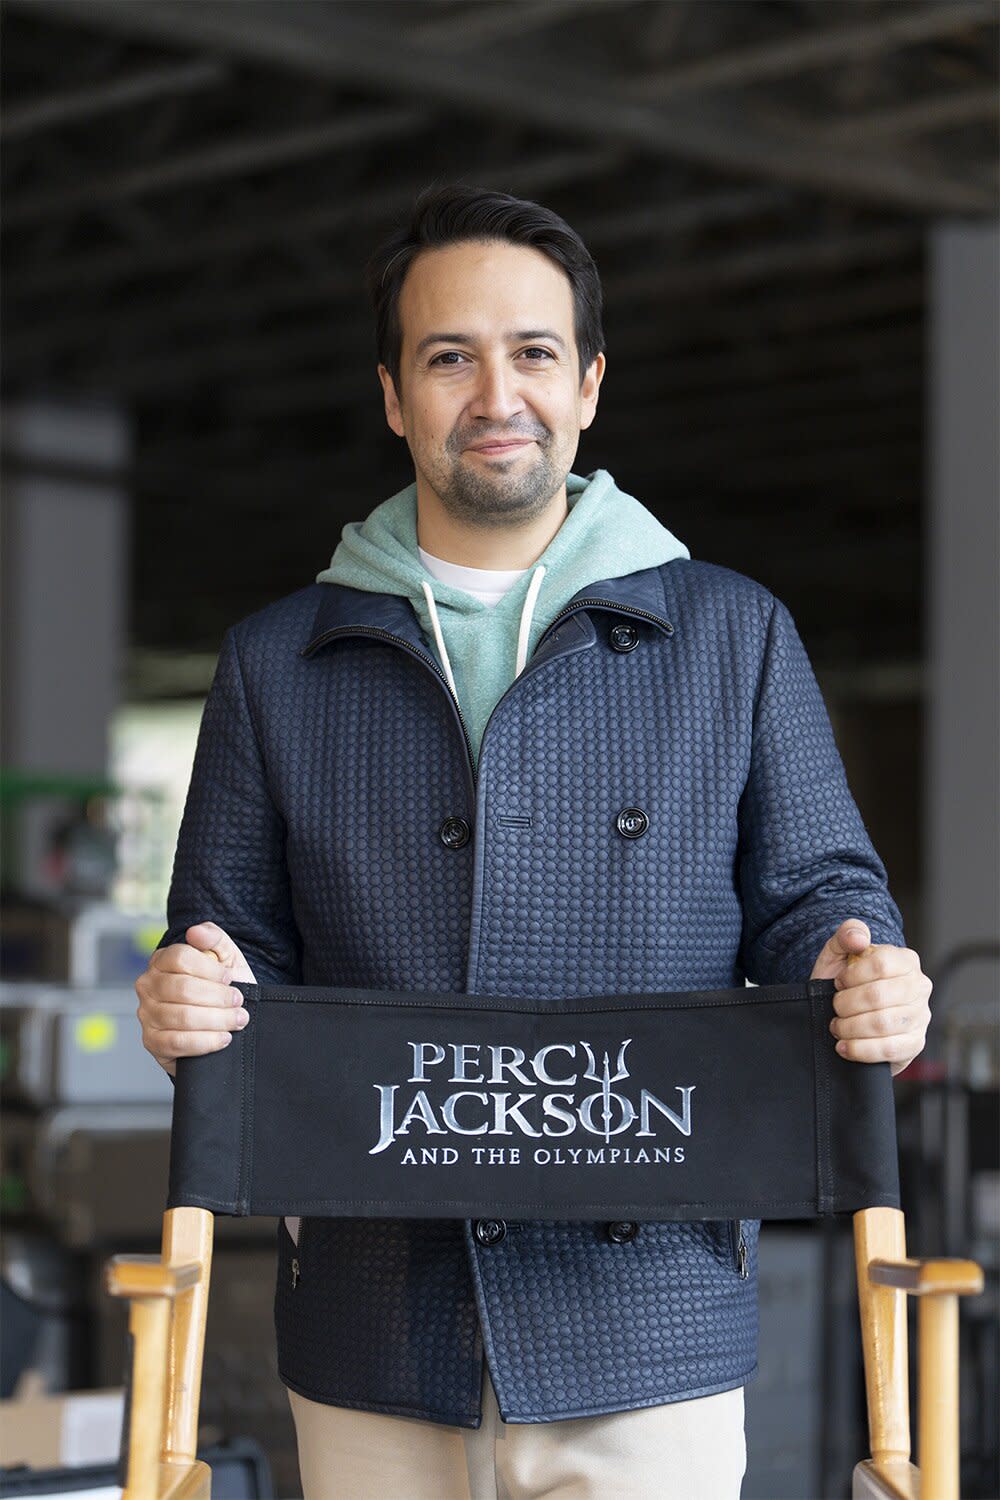 https://twitter.com/PercySeries/status/1589716970177703936/photo/2   Percy Jackson @PercySeries A message from the messenger god himself:  @Lin_Manuel  Miranda is Hermes in #PercyJackson and the Olympians, an Original series coming to  @DisneyPlus ! 12:30 PM · Nov 7, 2022 ·Twitter Web App